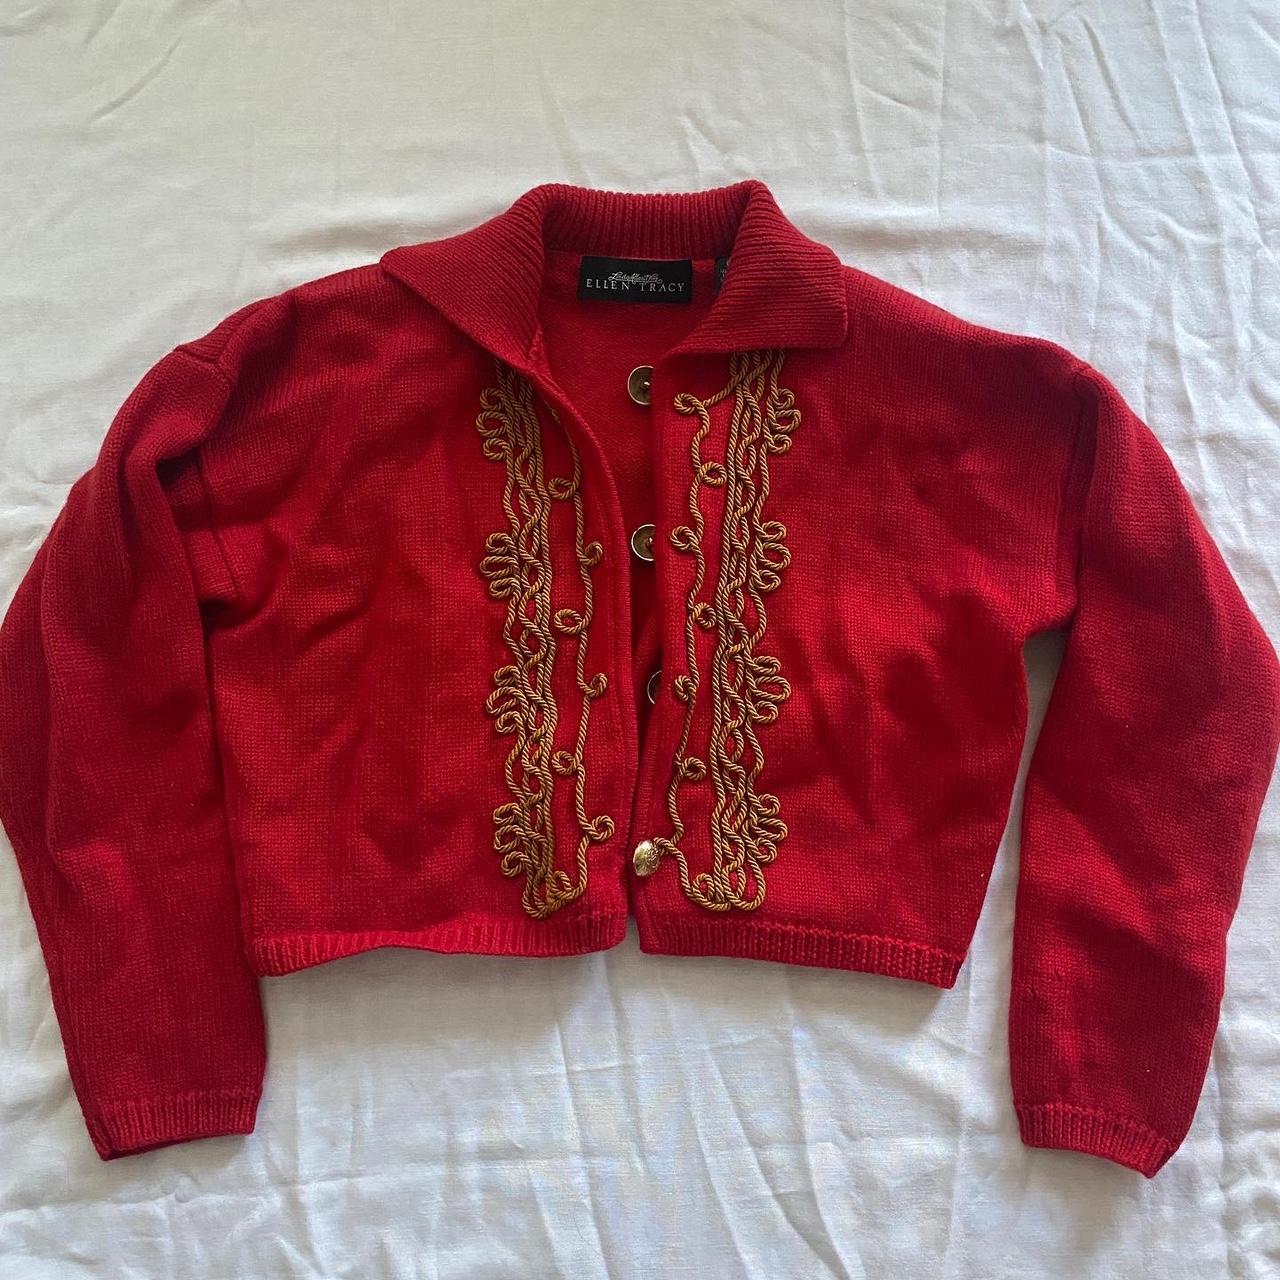 Ellen Tracy Women's Red and Gold Jacket